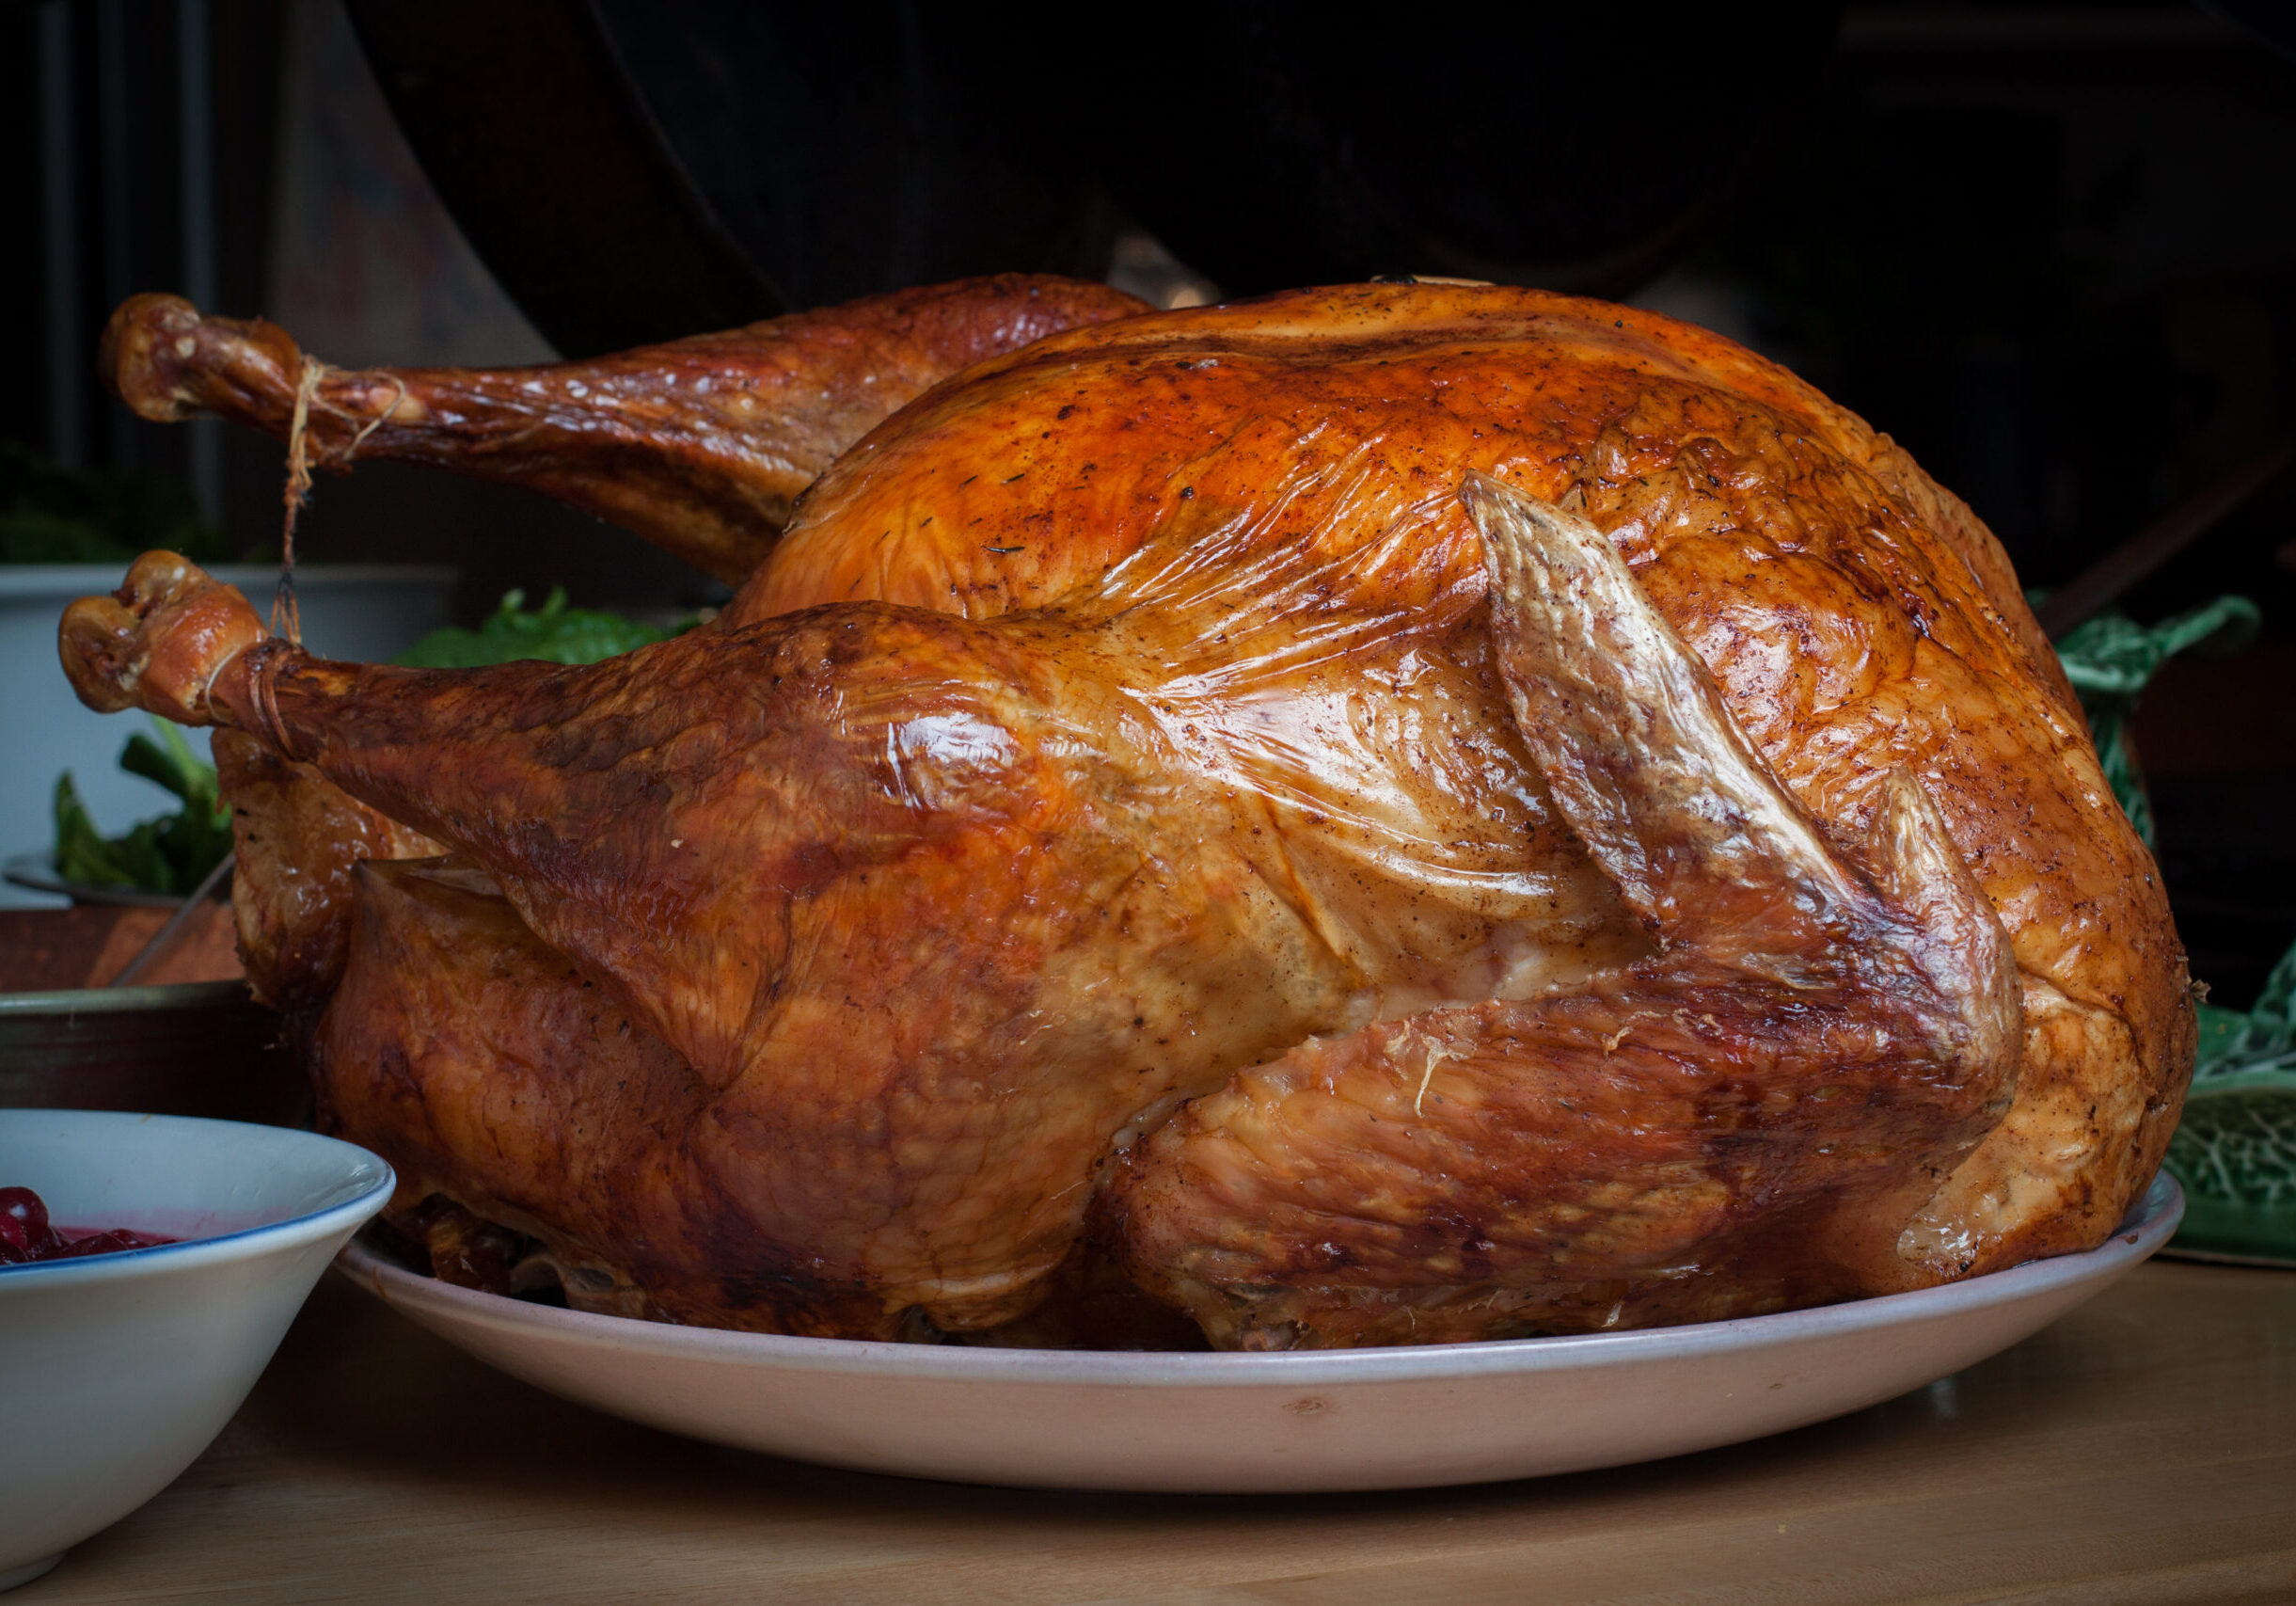 While it didn't look quite like this -- I did cook my first Thanksgiving turkey this year. Photo: Tim Sackton, Creative Commons